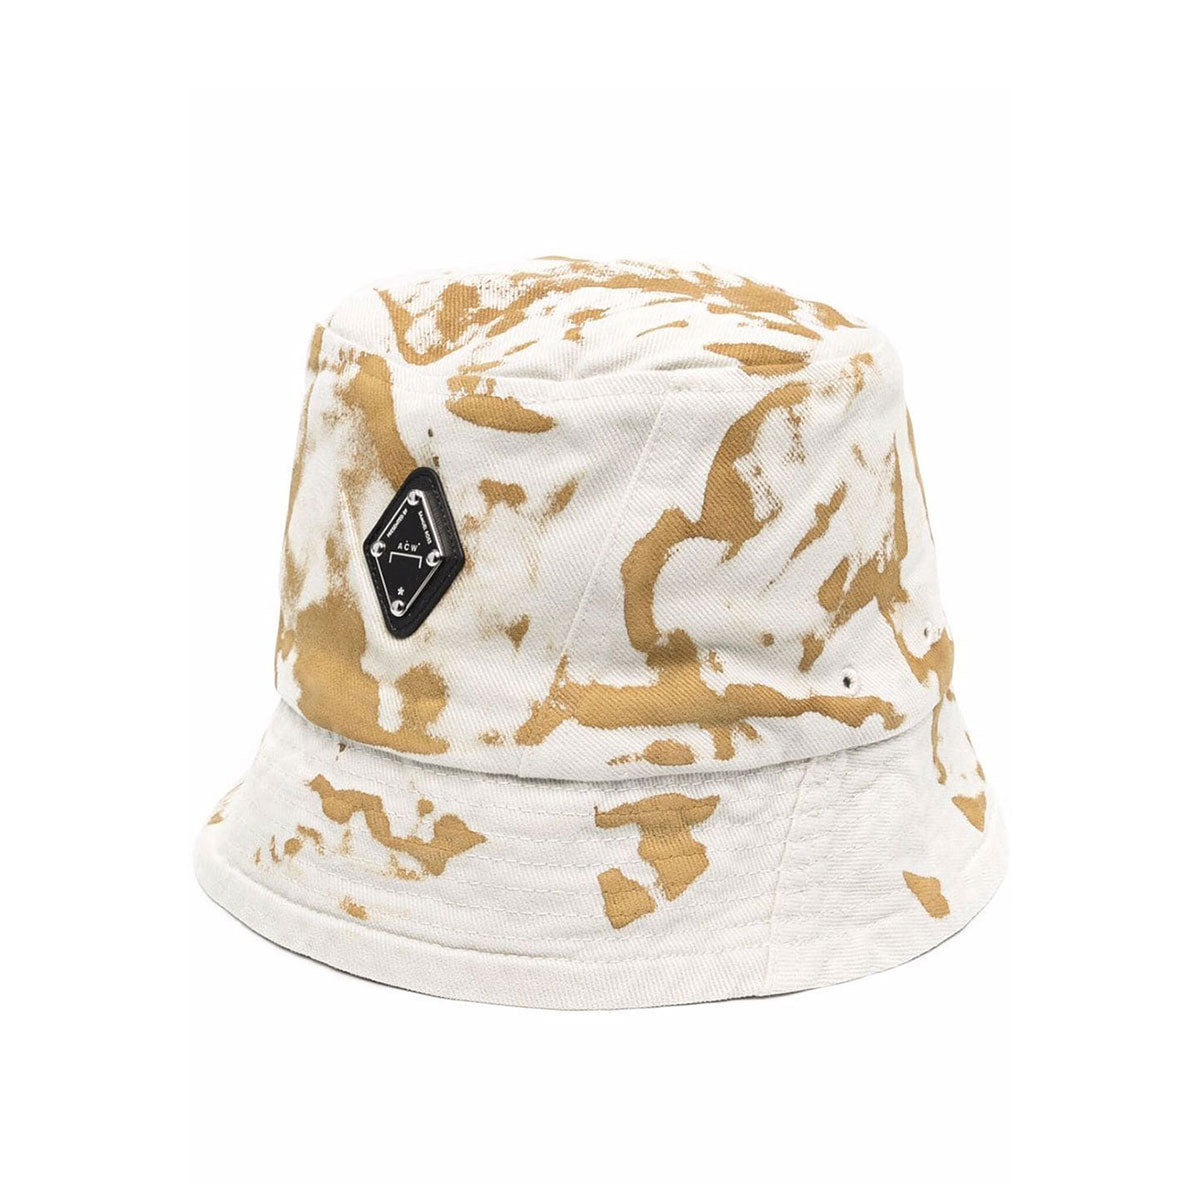 DIAMOND BUCKET HAT - Why are you here?